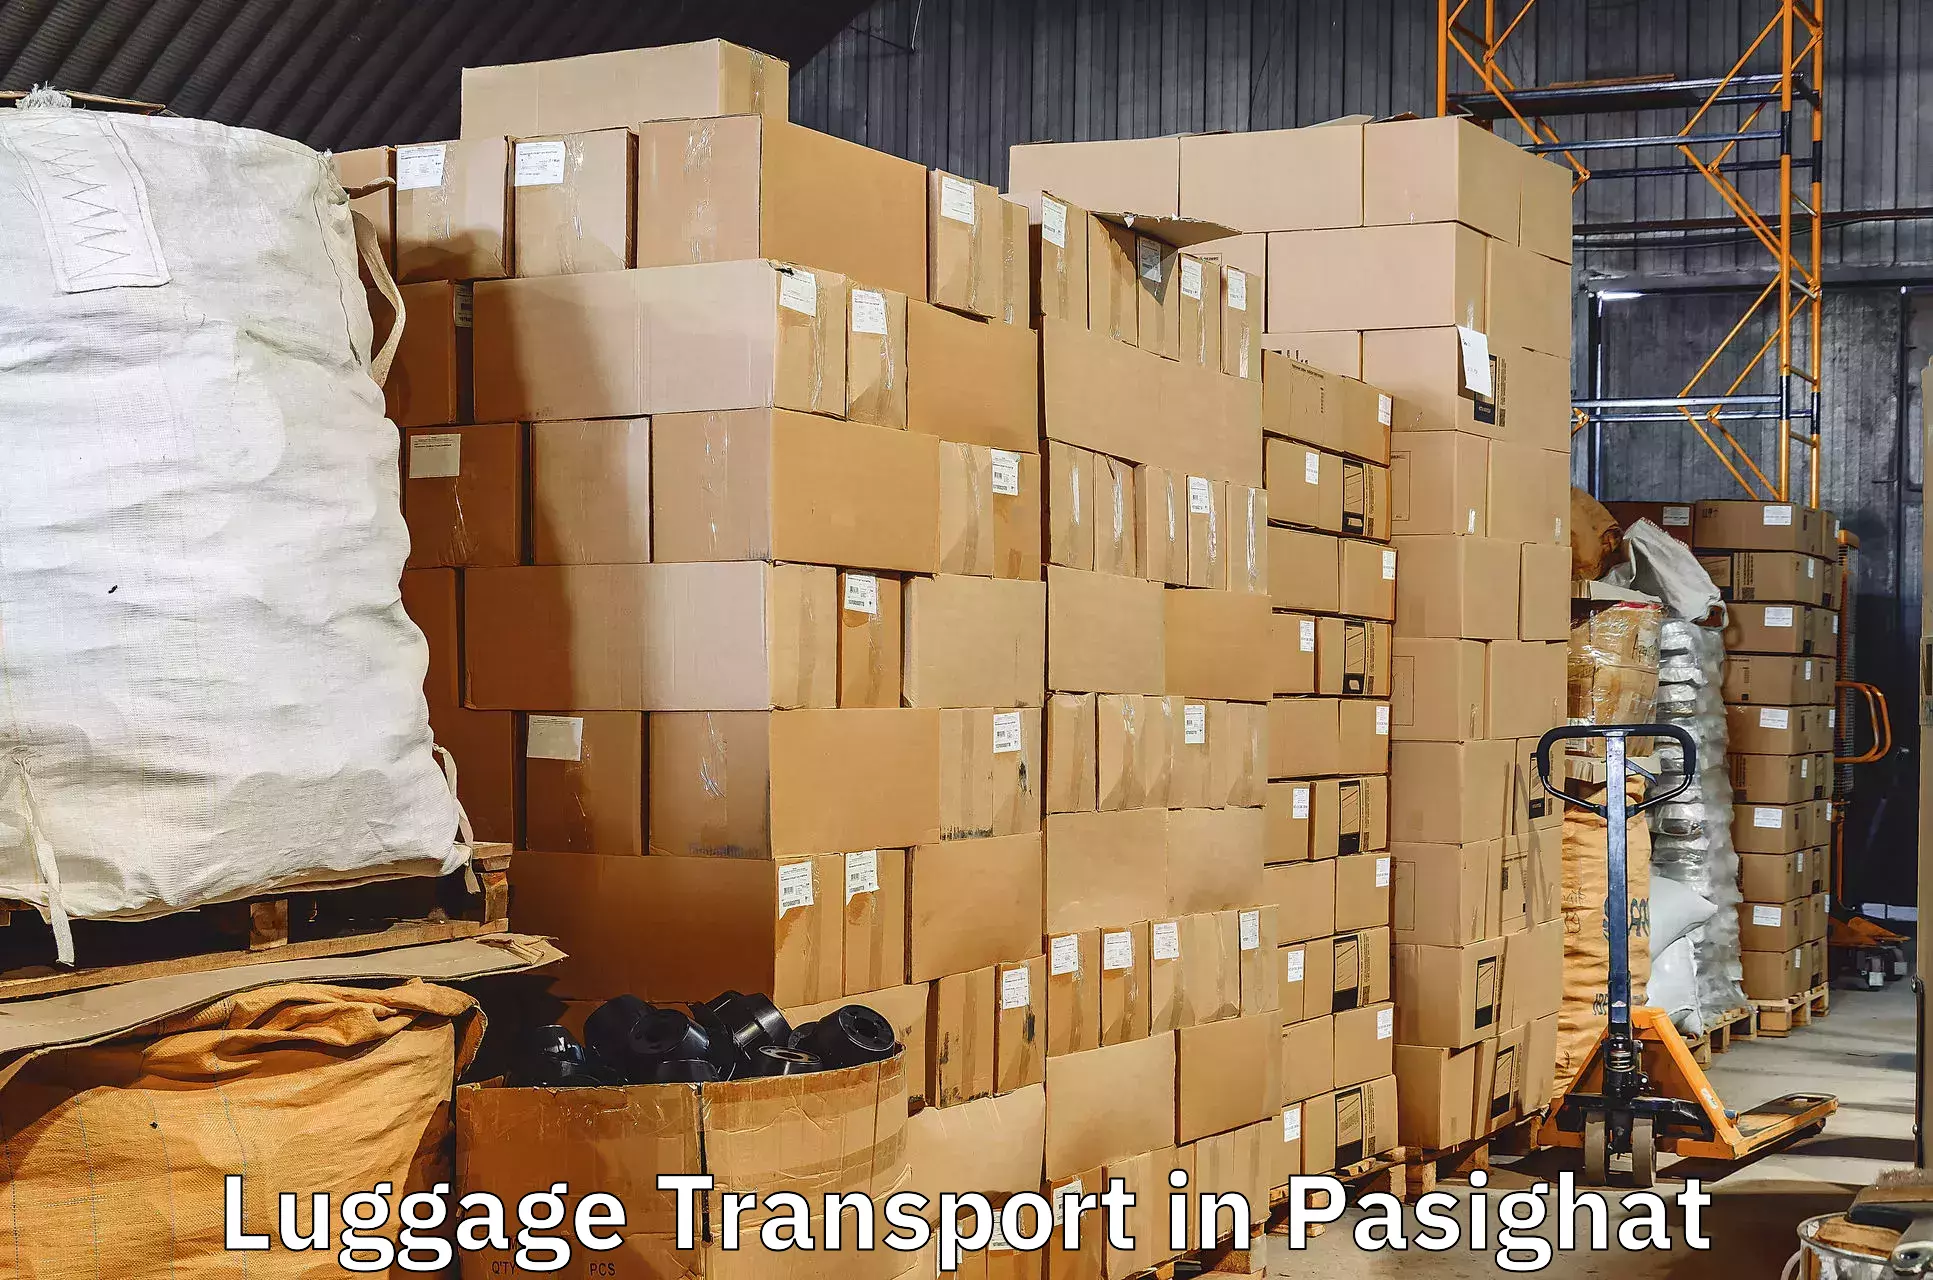 Luggage storage and delivery in Pasighat